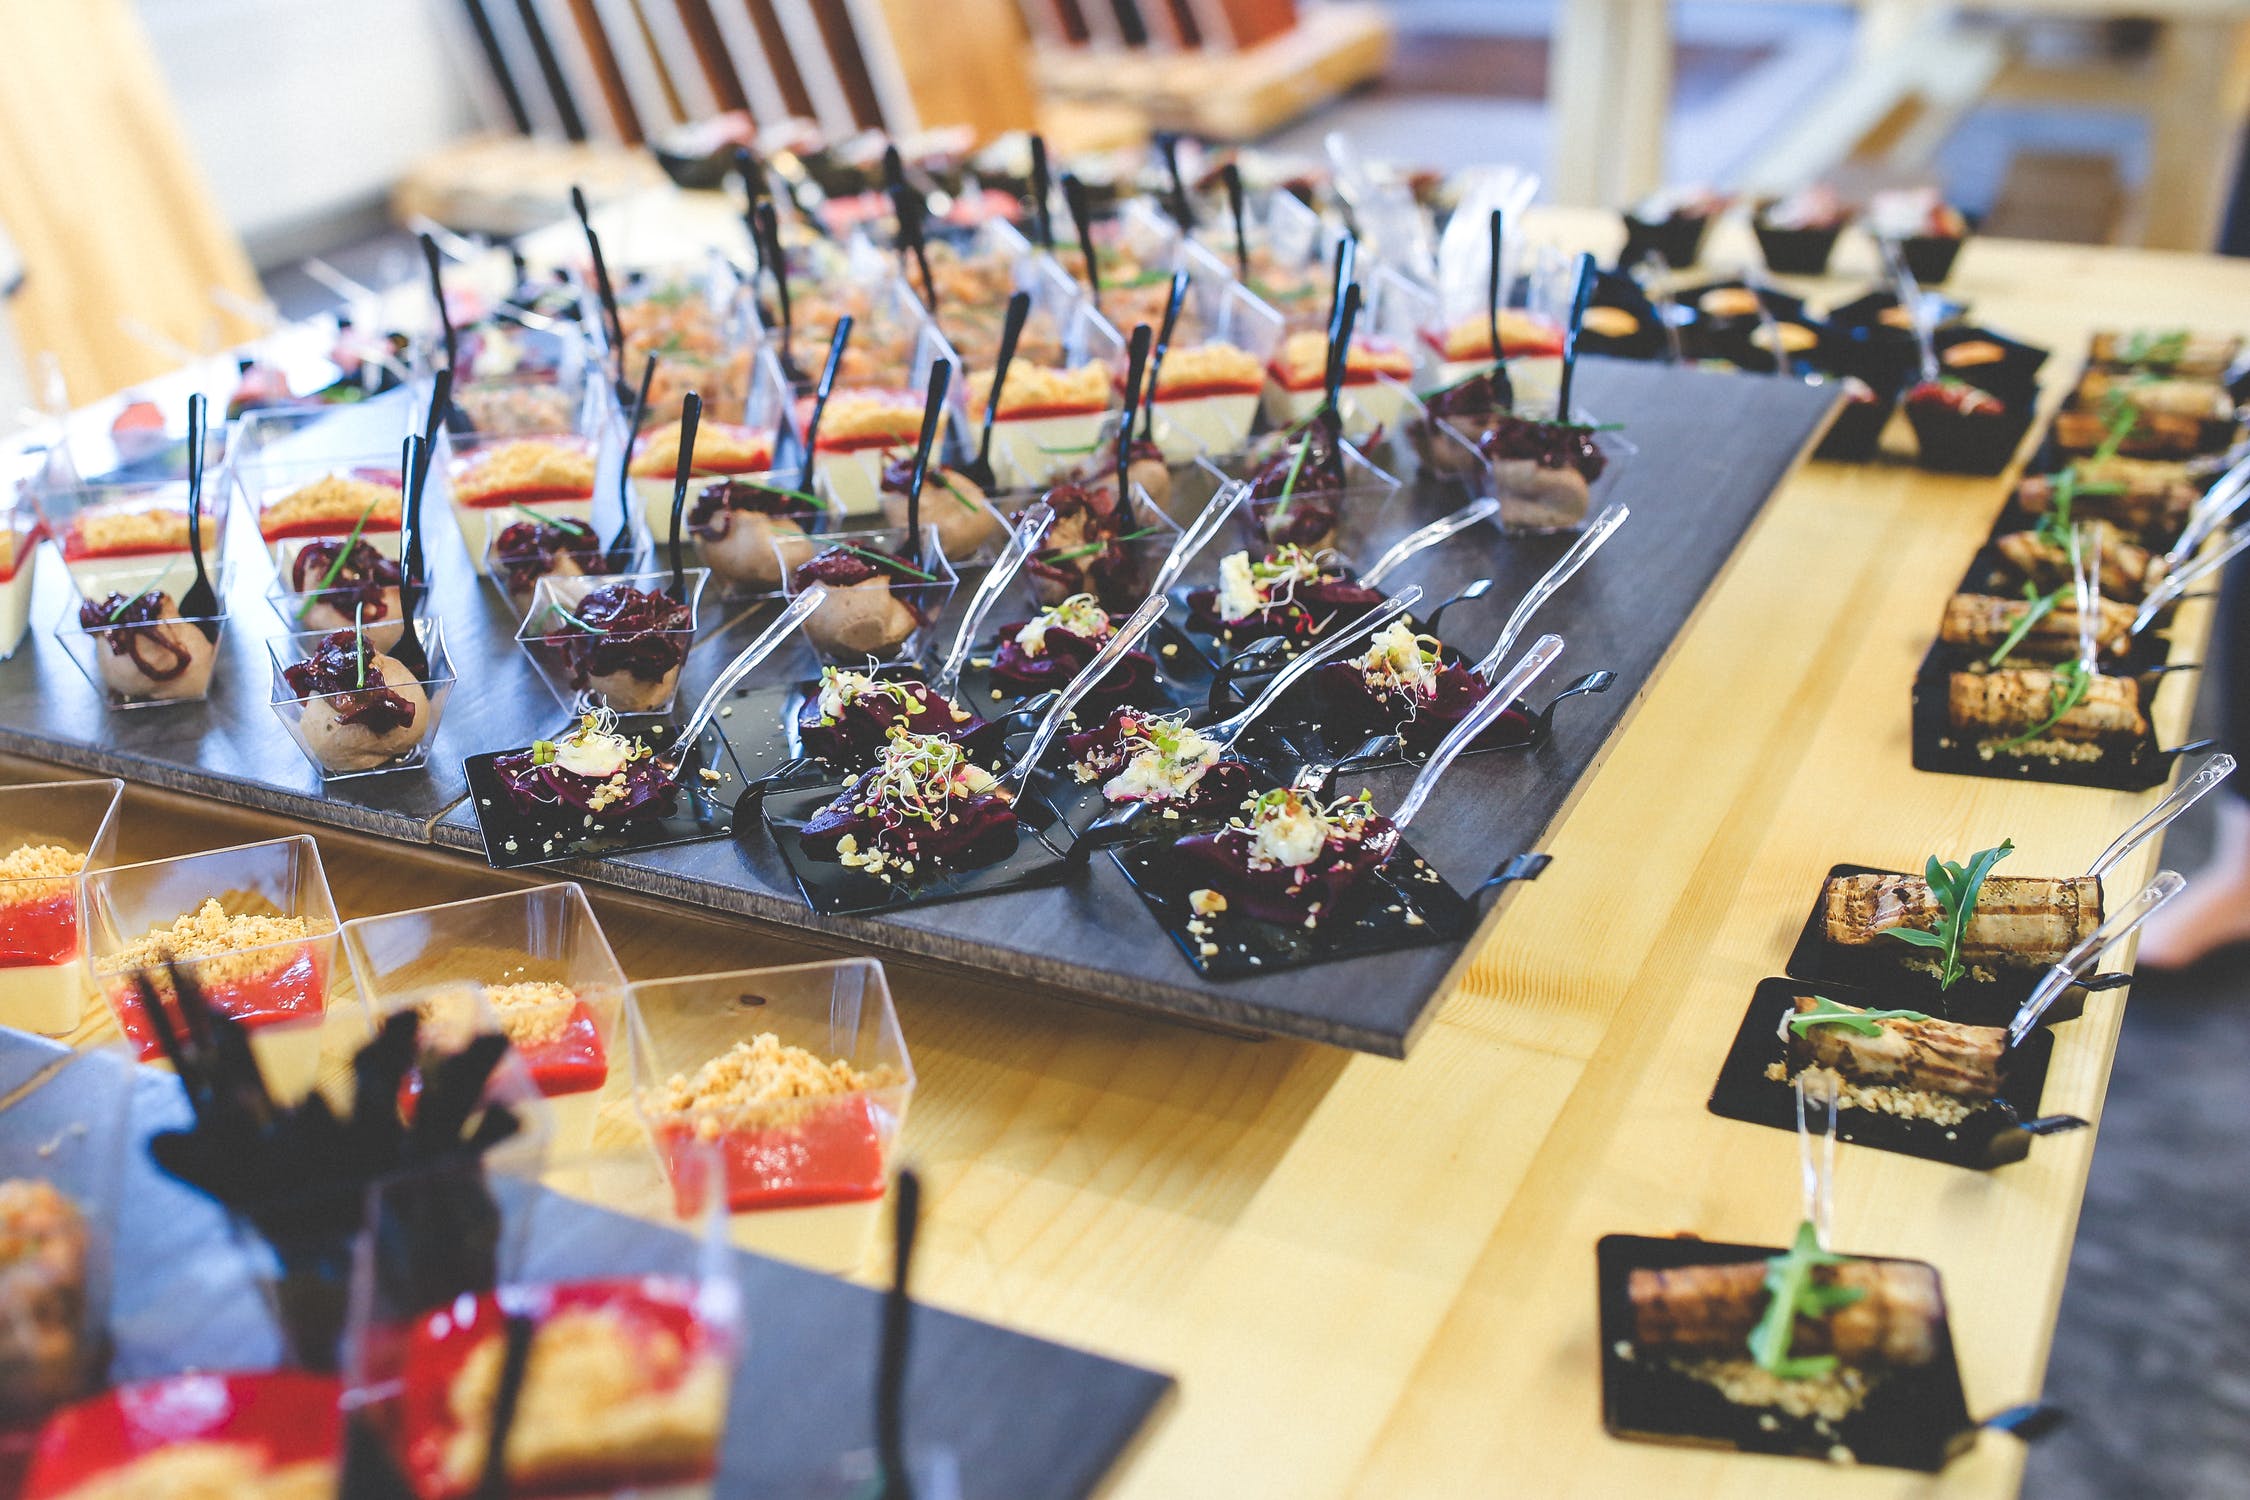 6 Tips for Starting a Home-Based Catering Business